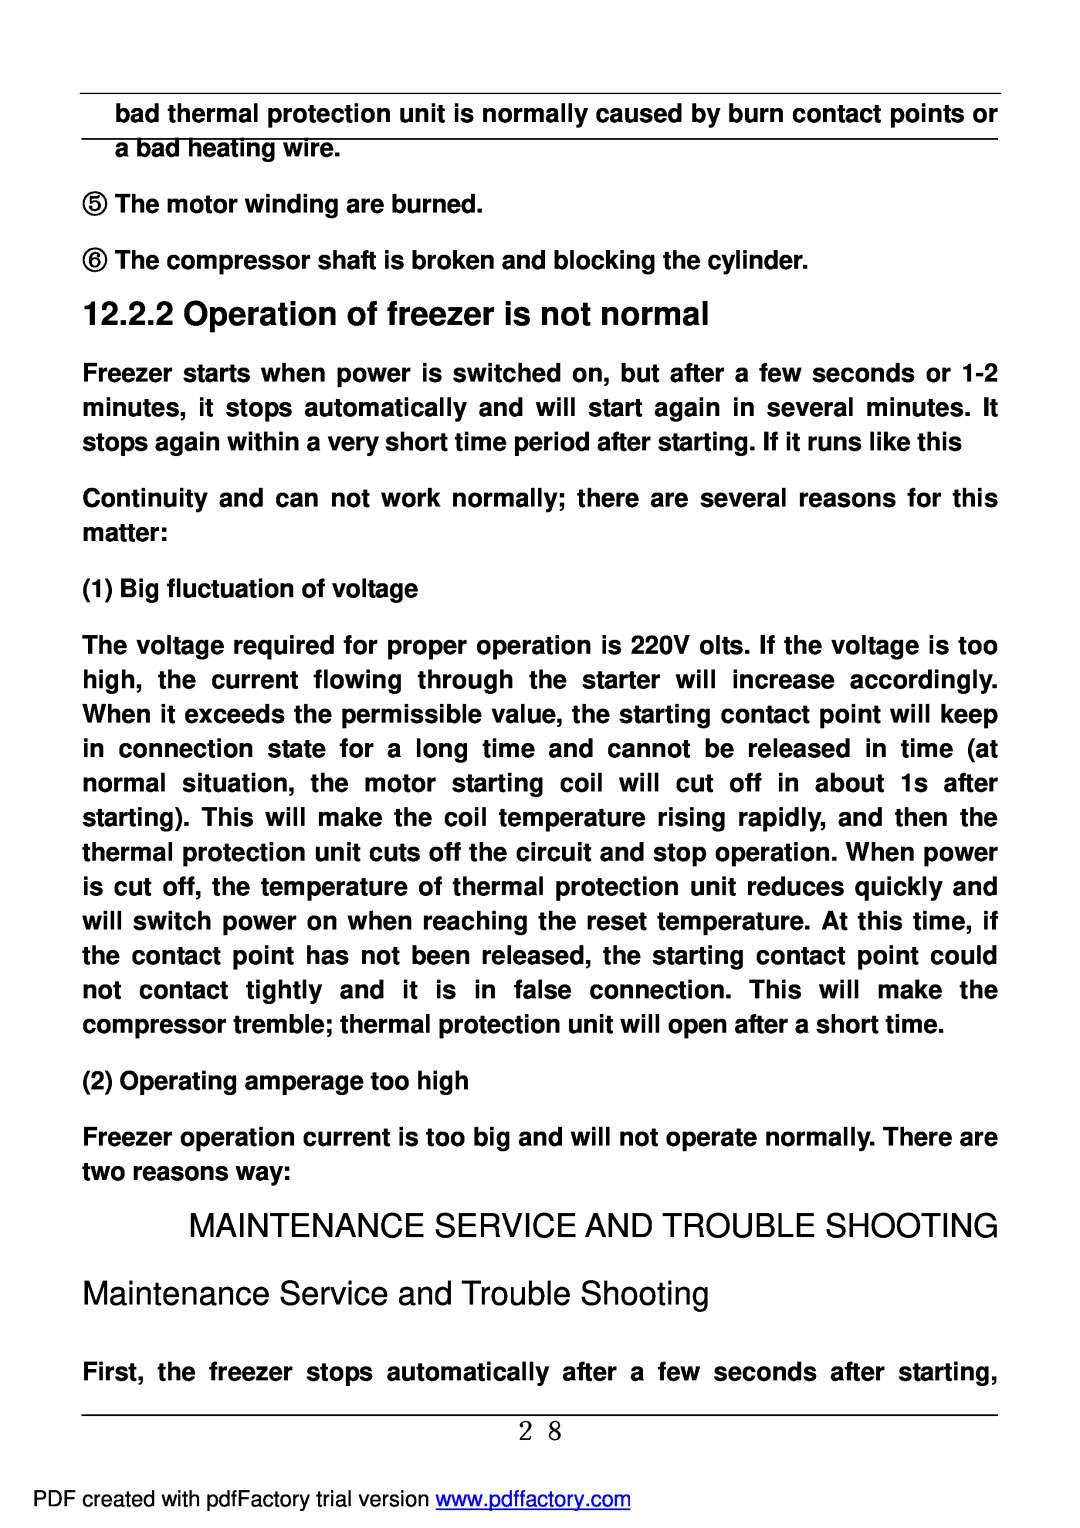 Haier BD-478A service manual Operation of freezer is not normal, Maintenance Service And Trouble Shooting 